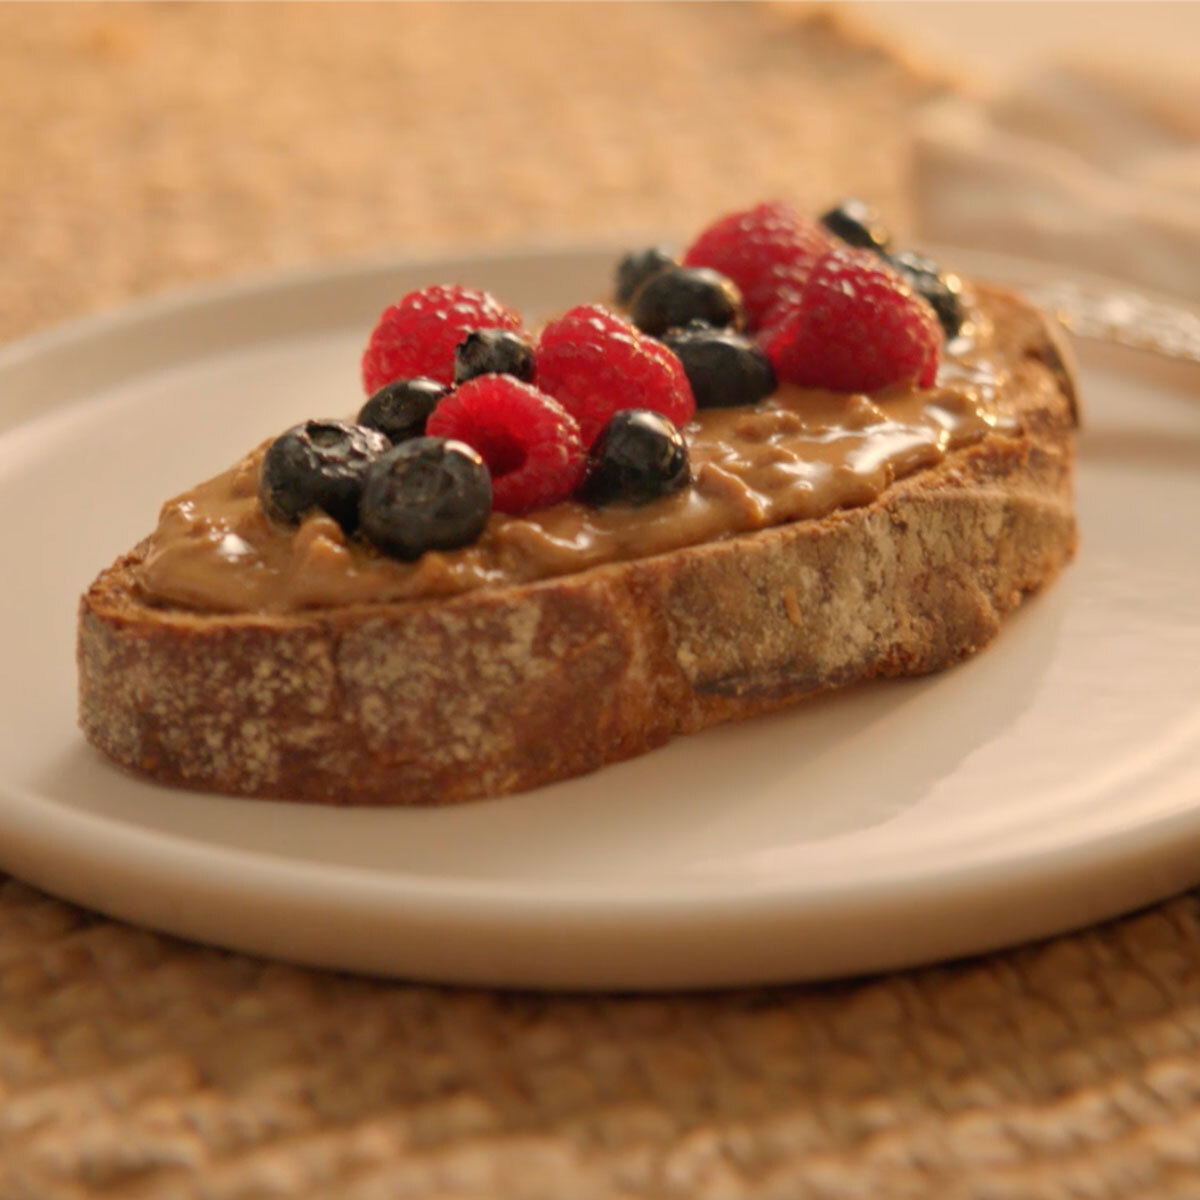 Peanut Butter on Bread with Berries